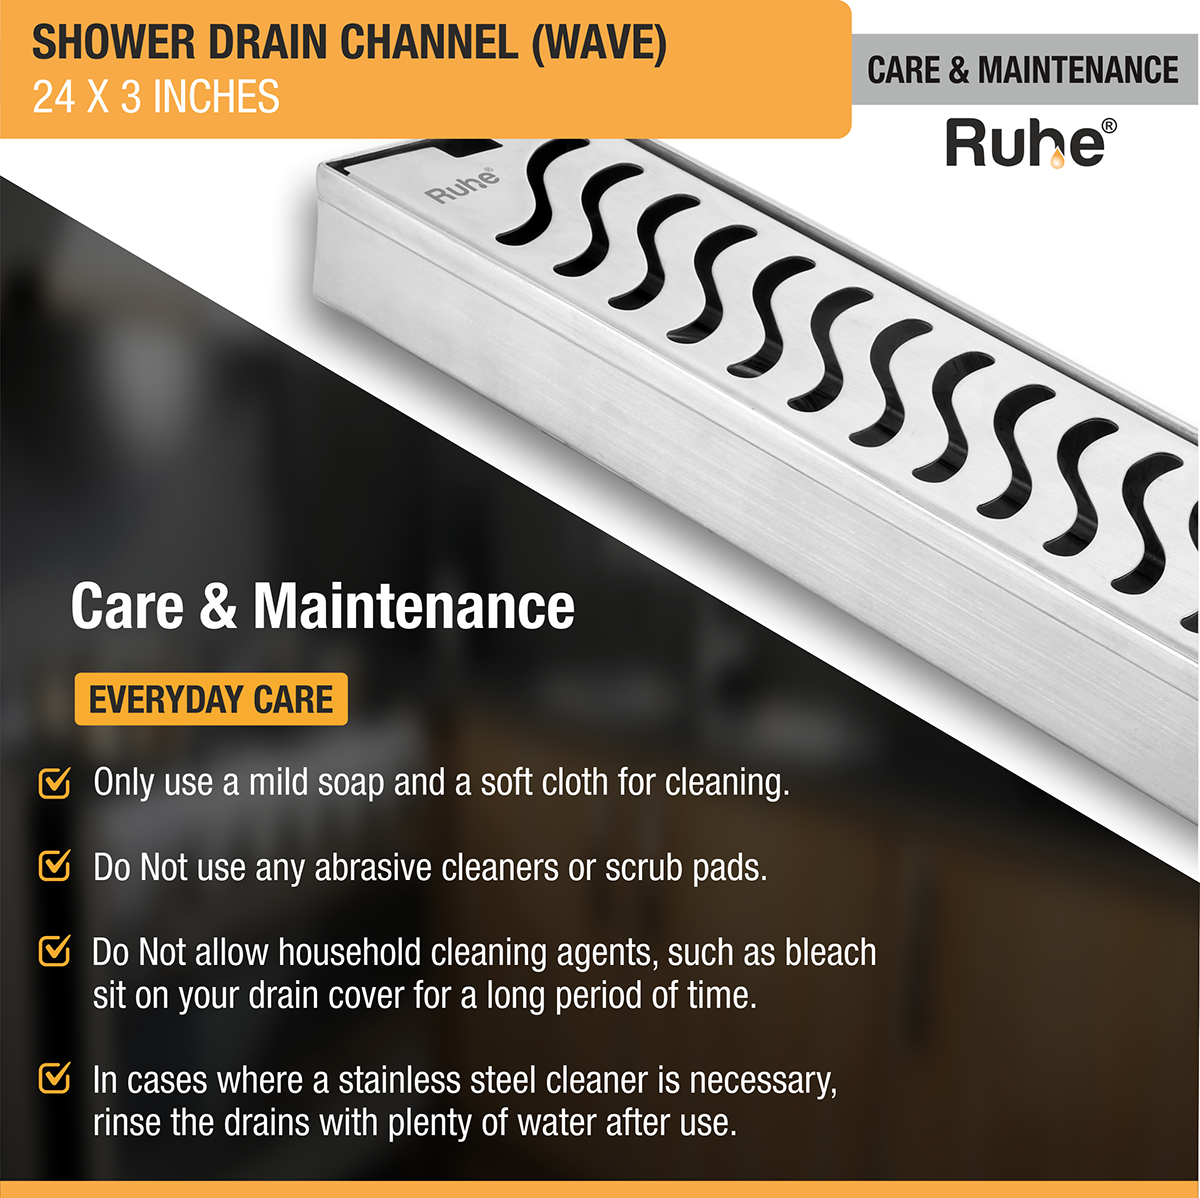 Wave Shower Drain Channel (24 X 3 Inches) with Cockroach Trap (304 Grade) care and maintenance